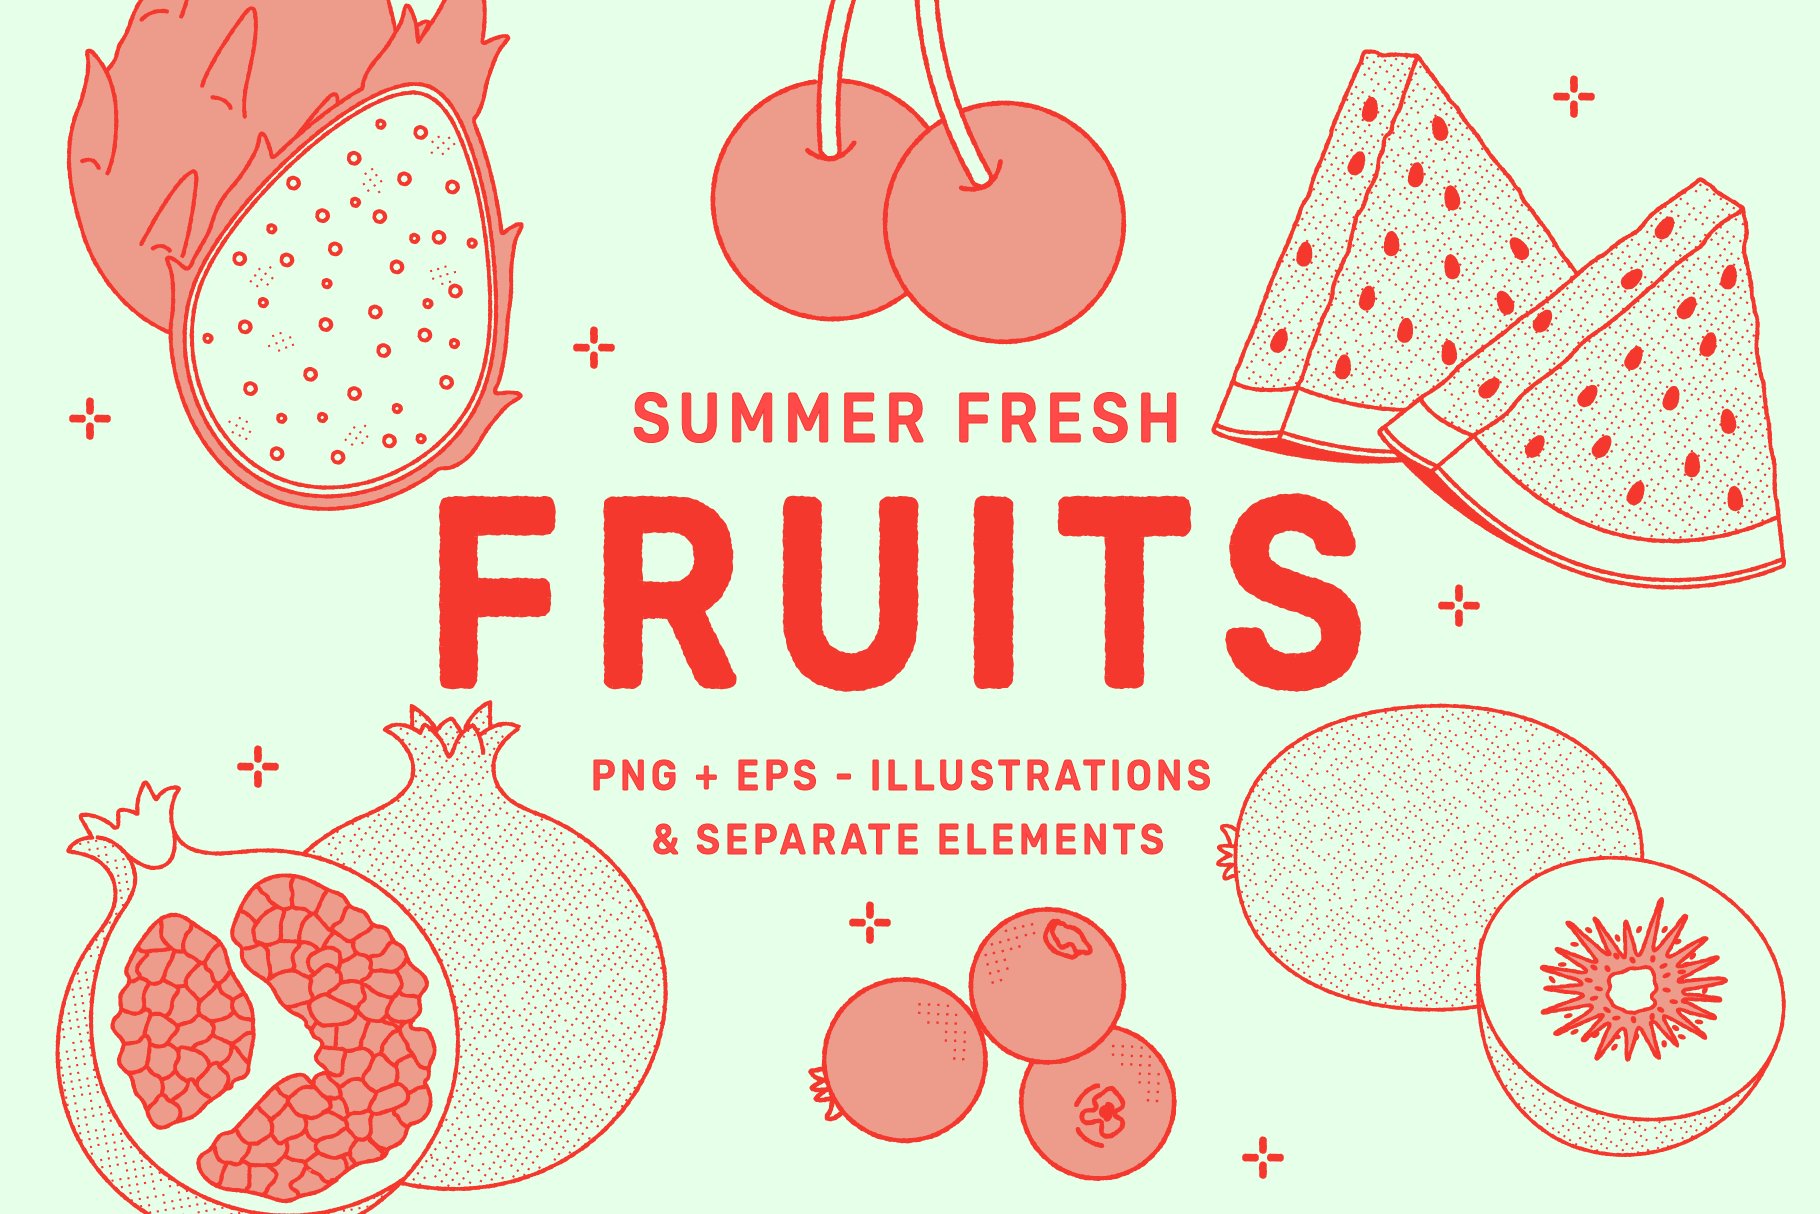 Fruits Vector Illustration cover image.